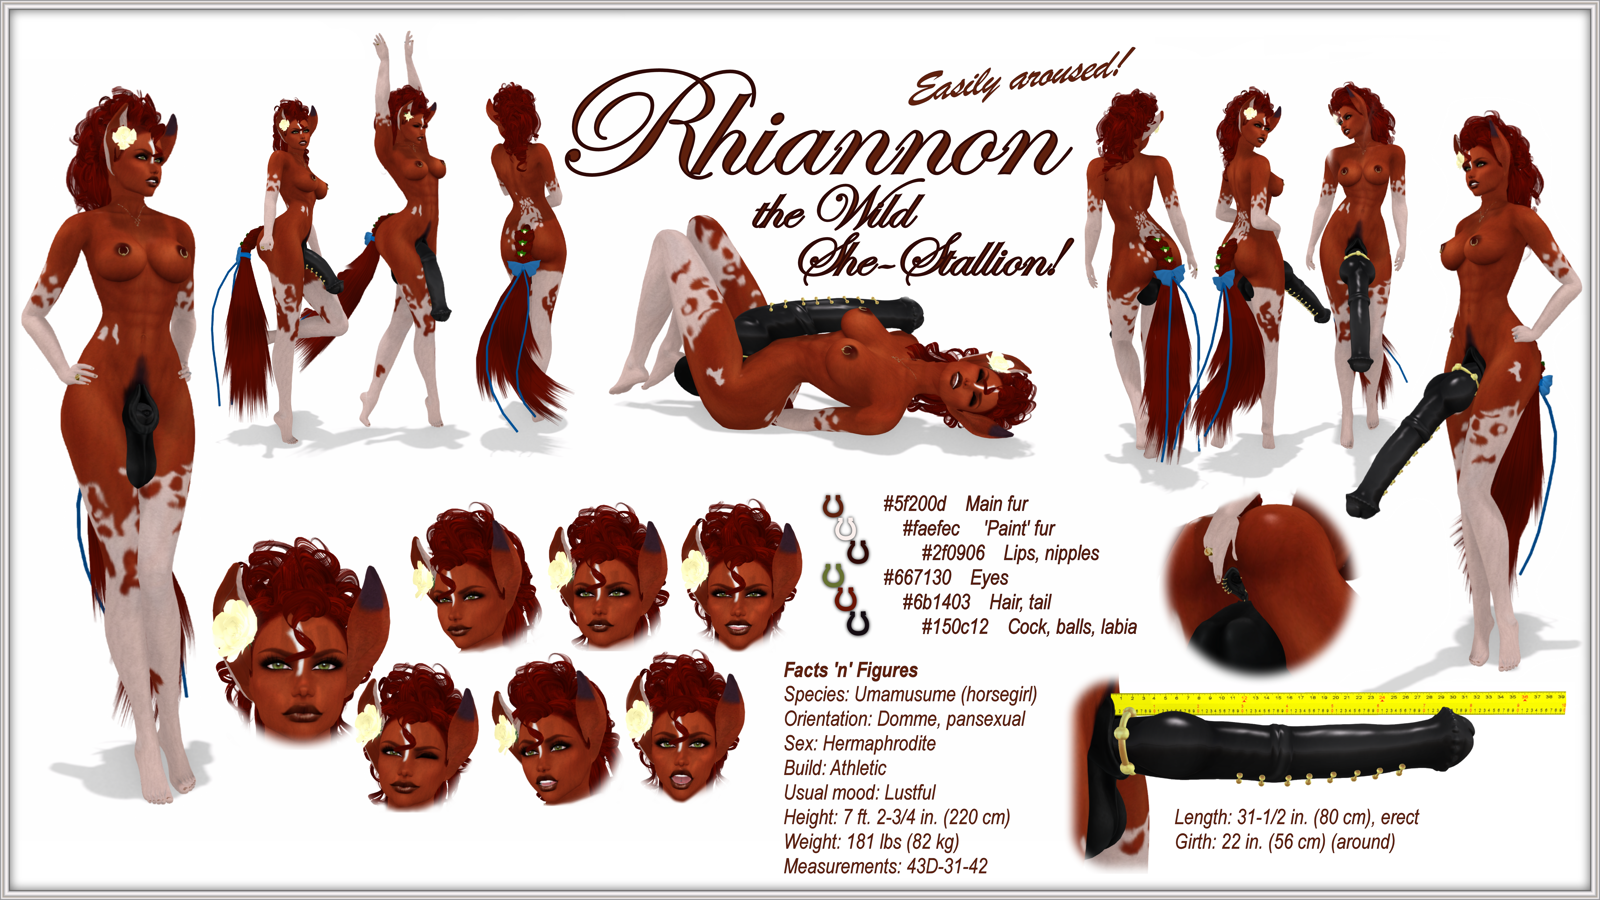 Photo by Rhiannon with the username @Rhiannon,  December 17, 2018 at 1:40 AM and the text says 'I want to start off with my model sheet! For those unfamiliar with them, these are references to help an artist draw someone! Since I've got several unique characteristics, I made this one to help any artists from whom I commission art pieces...'